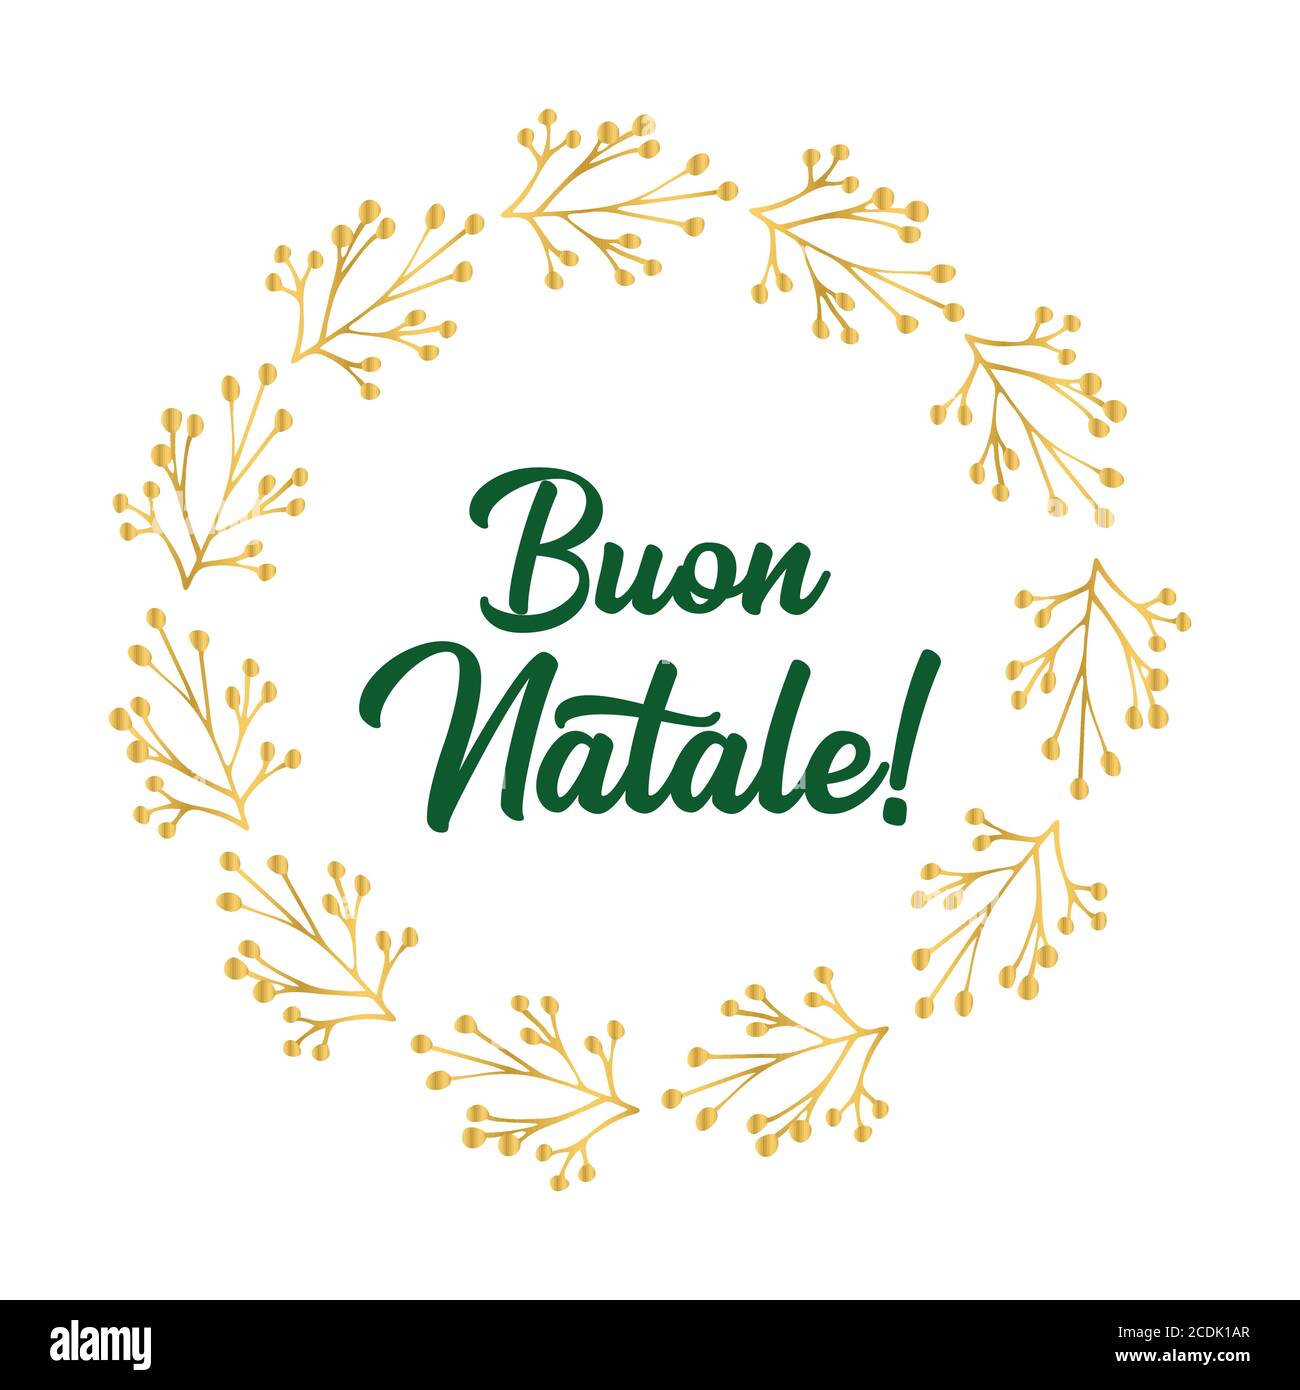 Font Buon Natale.Buon Natale Quote In Italian With Wreath As Logo Or Header Translated Merry Christmas Celebration Lettering For Poster Card Invitation Stock Vector Image Art Alamy